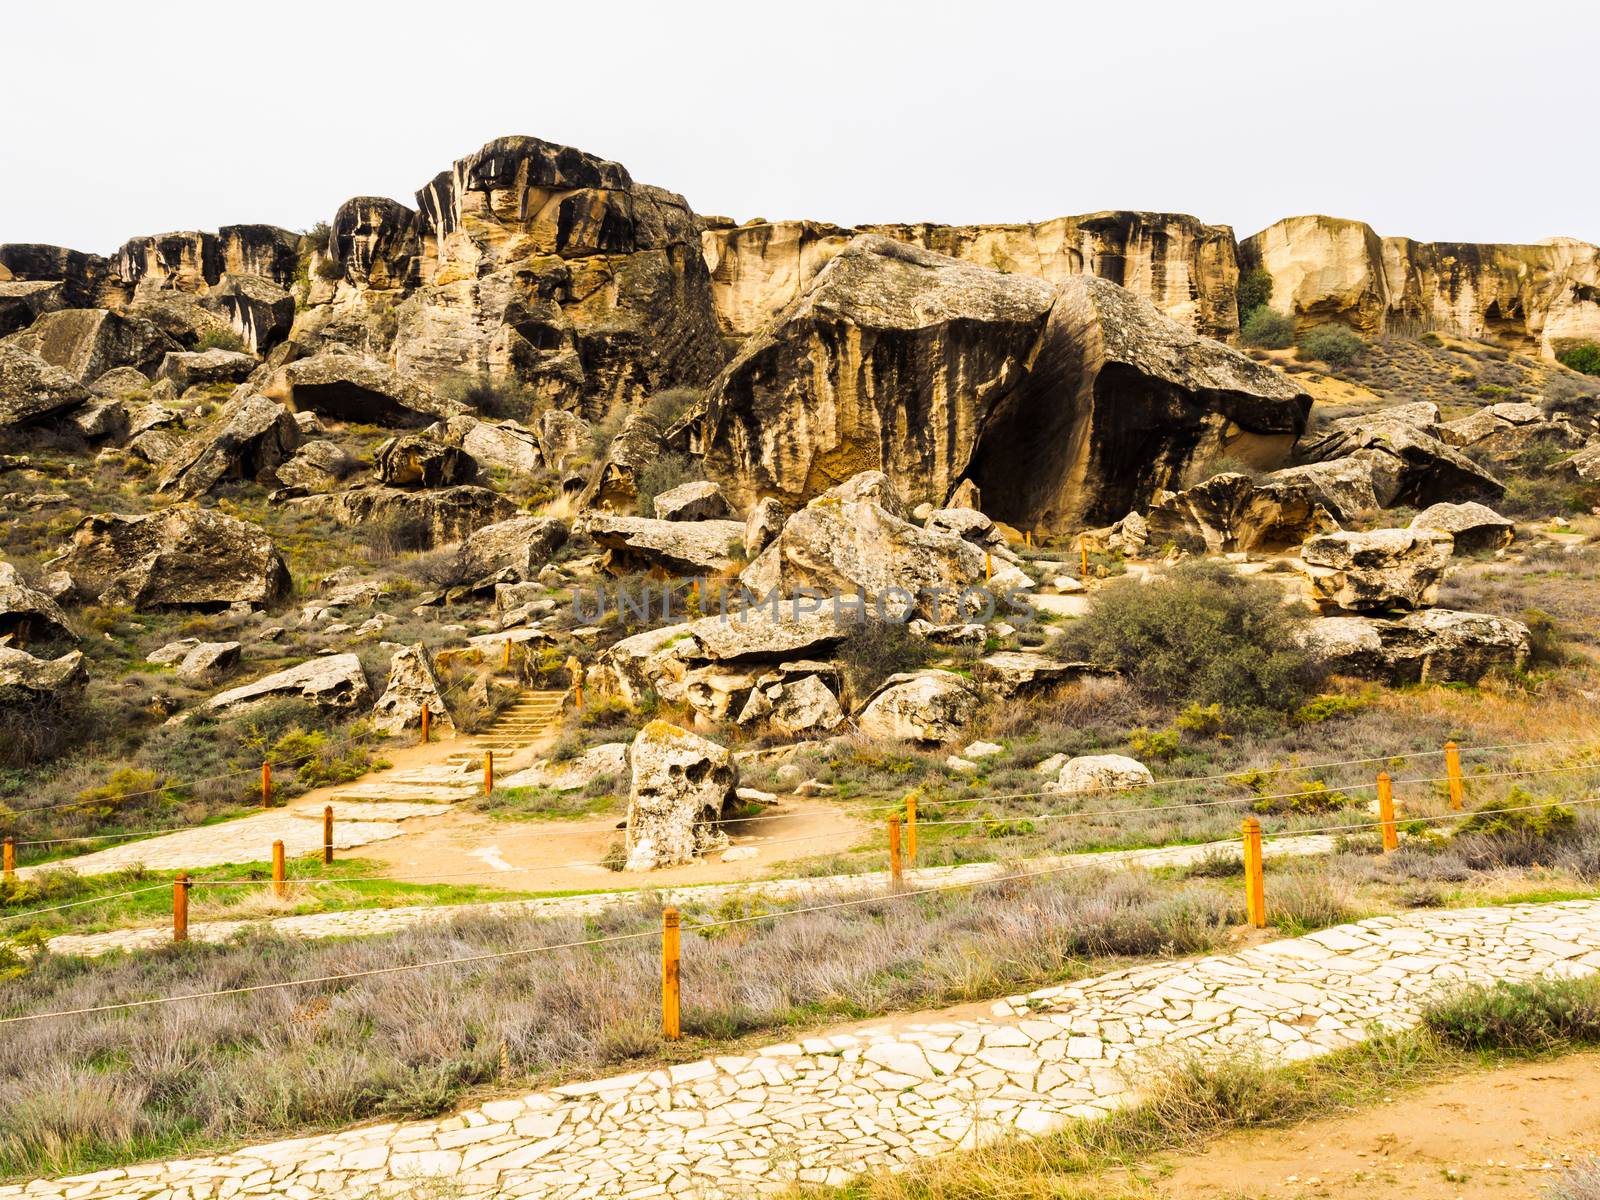 Qobustan national park is a national historical landmark of Azerbaijan in an attempt to preserve the ancient carvings, relics, mud volcanoes and gas-stones